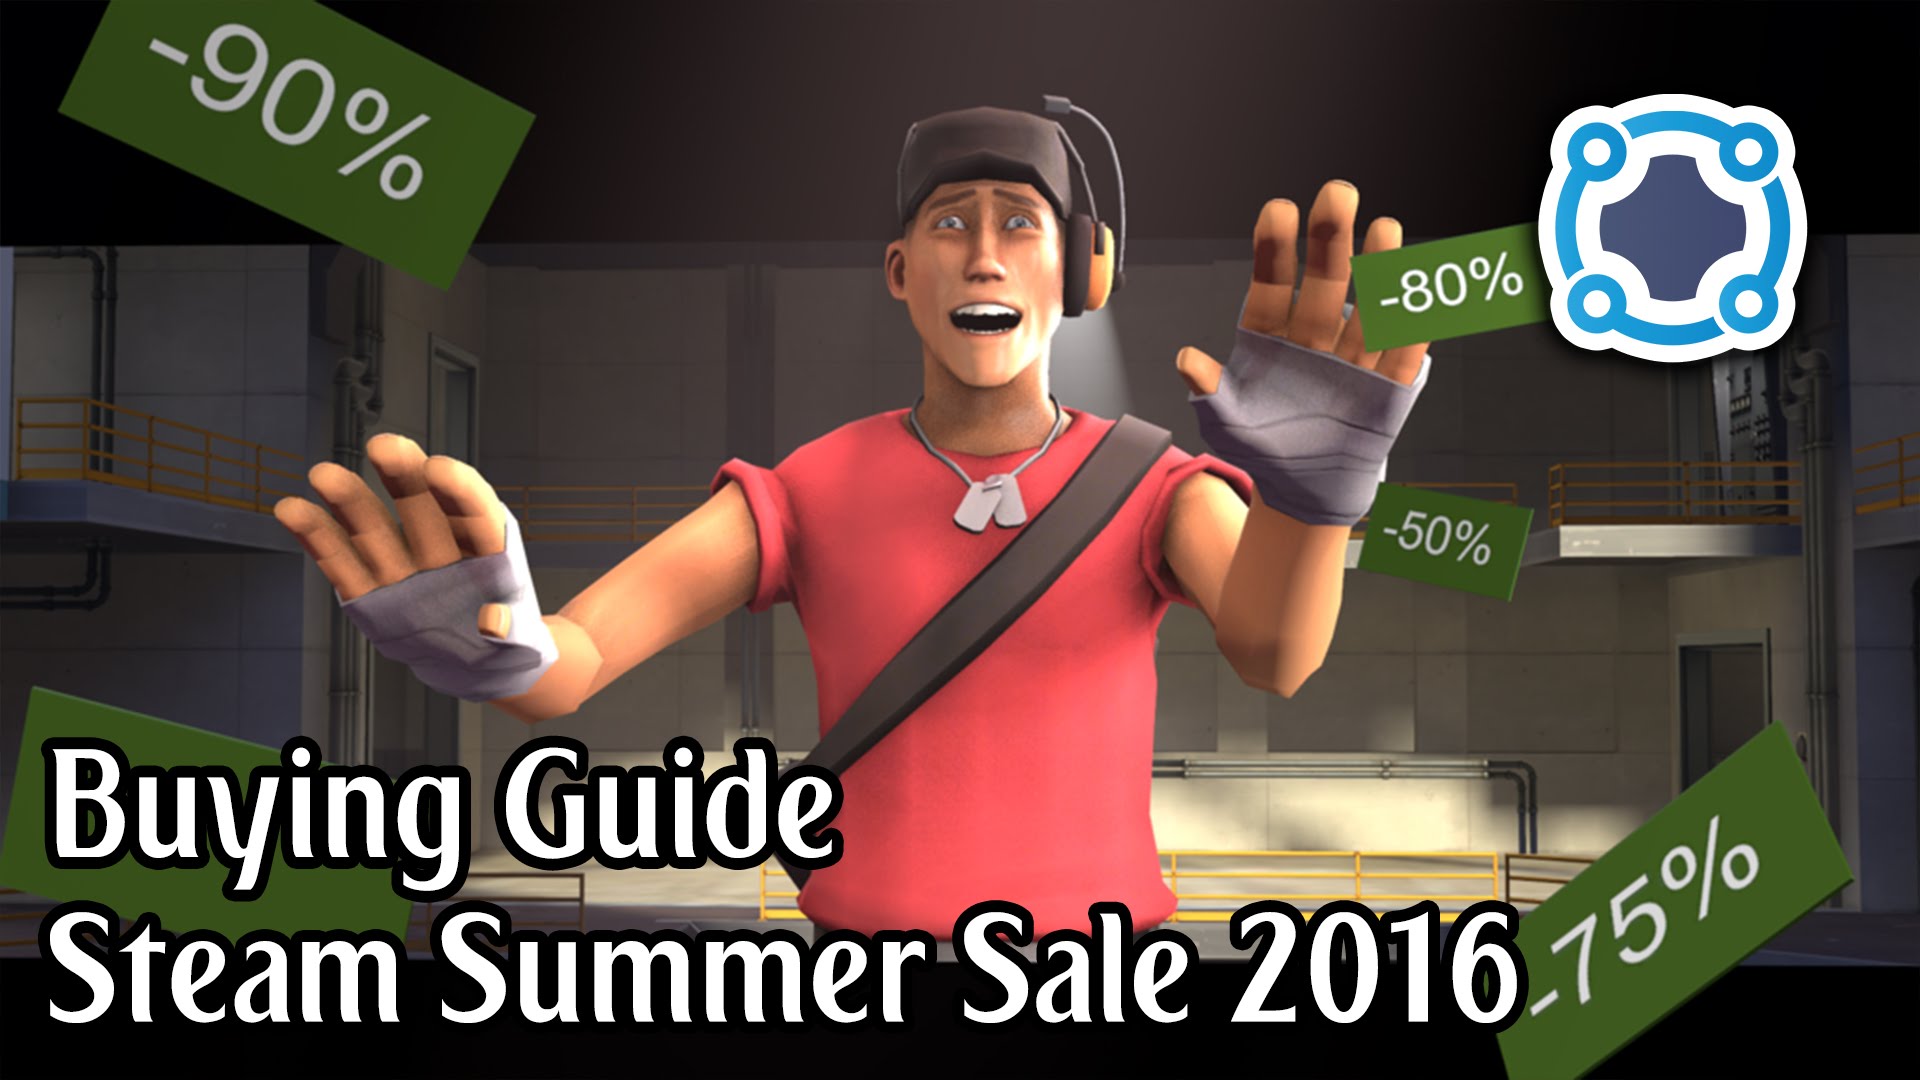 Steam Summer Sale 2016 Buying Guide